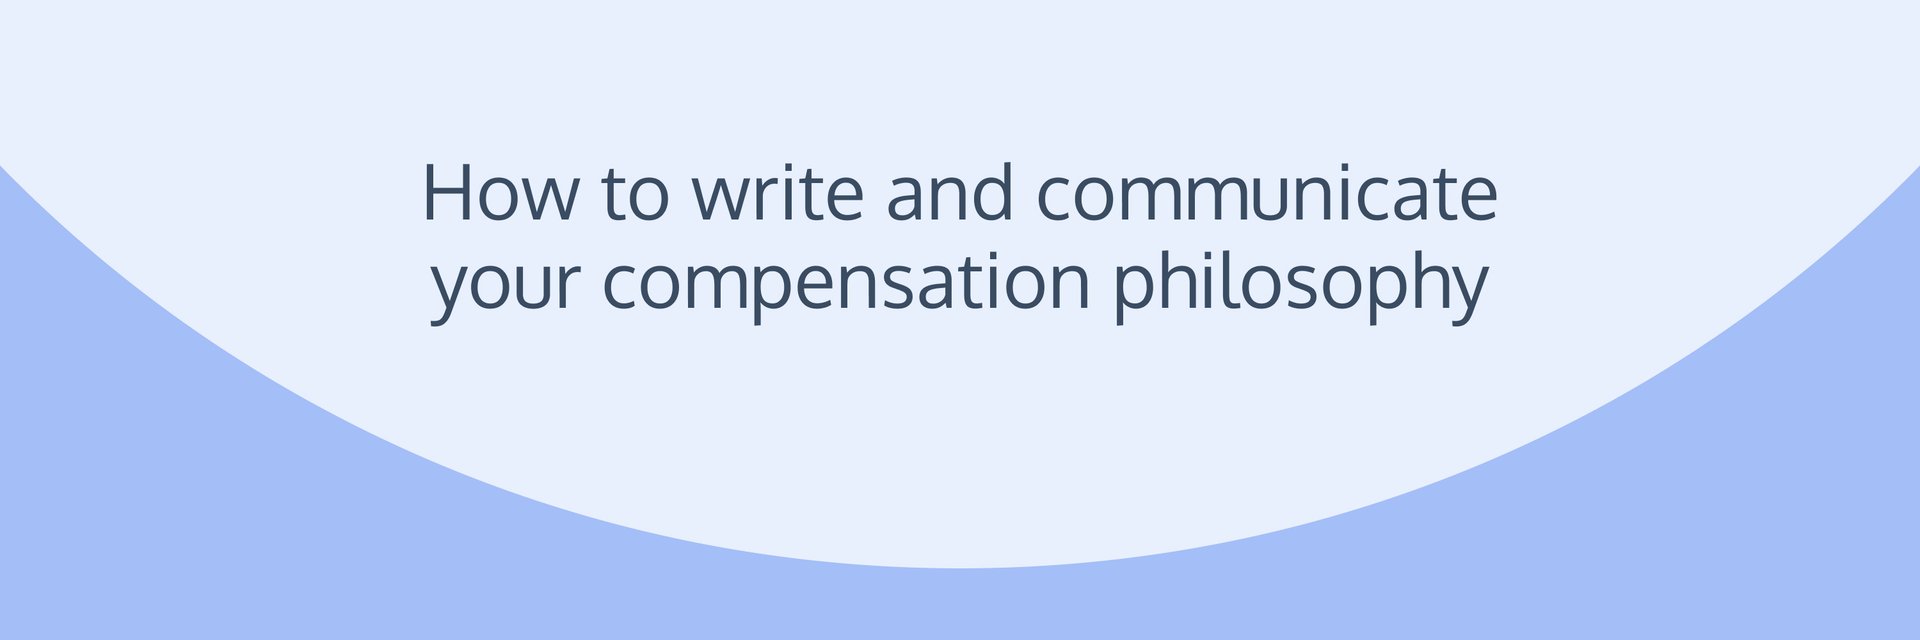 How to write and communicate your compensation philosophy